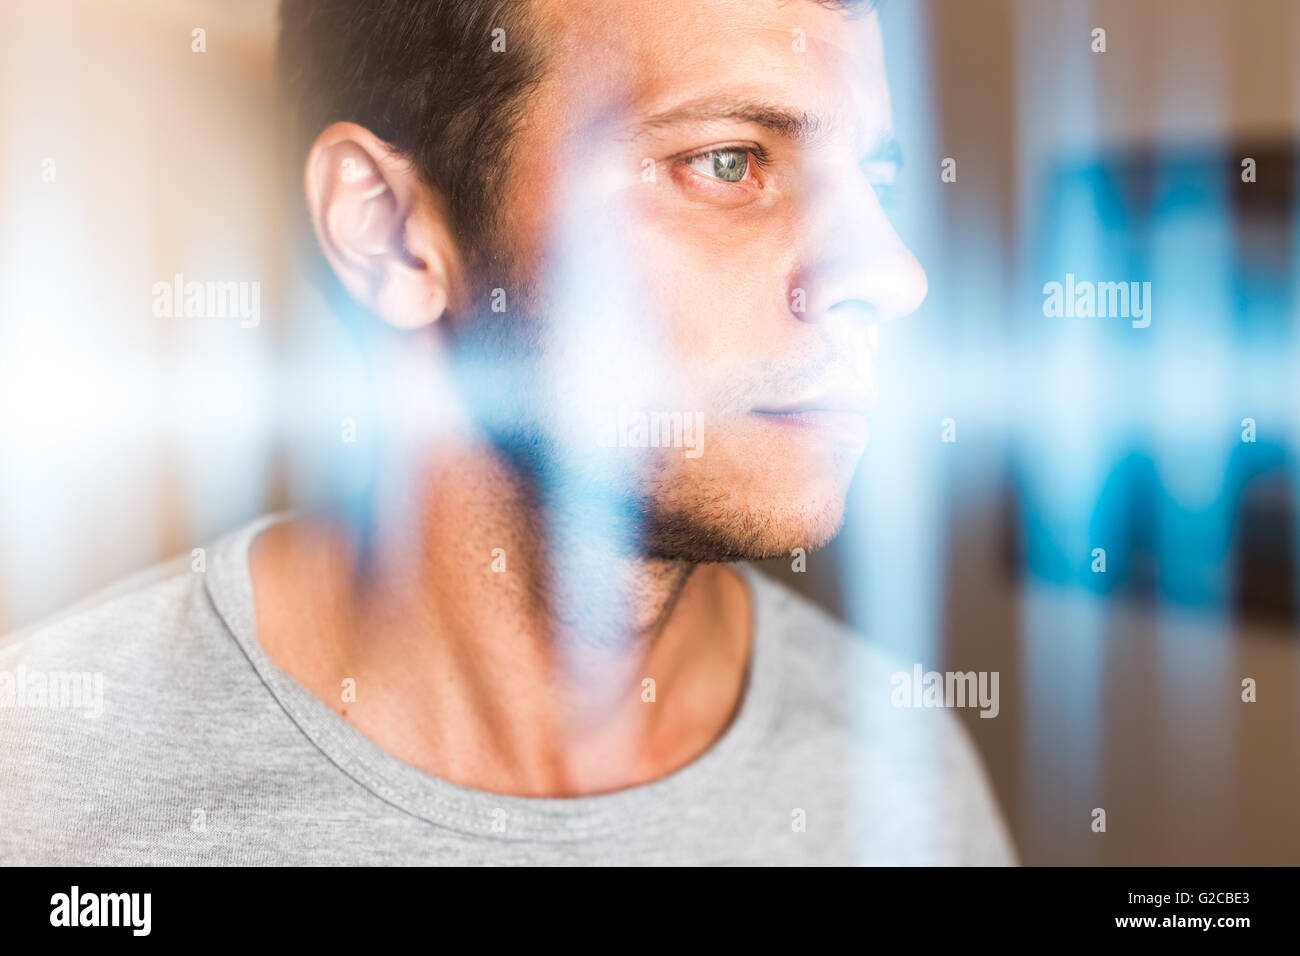 Multiexposure photo of a man and music waves. Hearing, perception of sounds and music Stock Photo